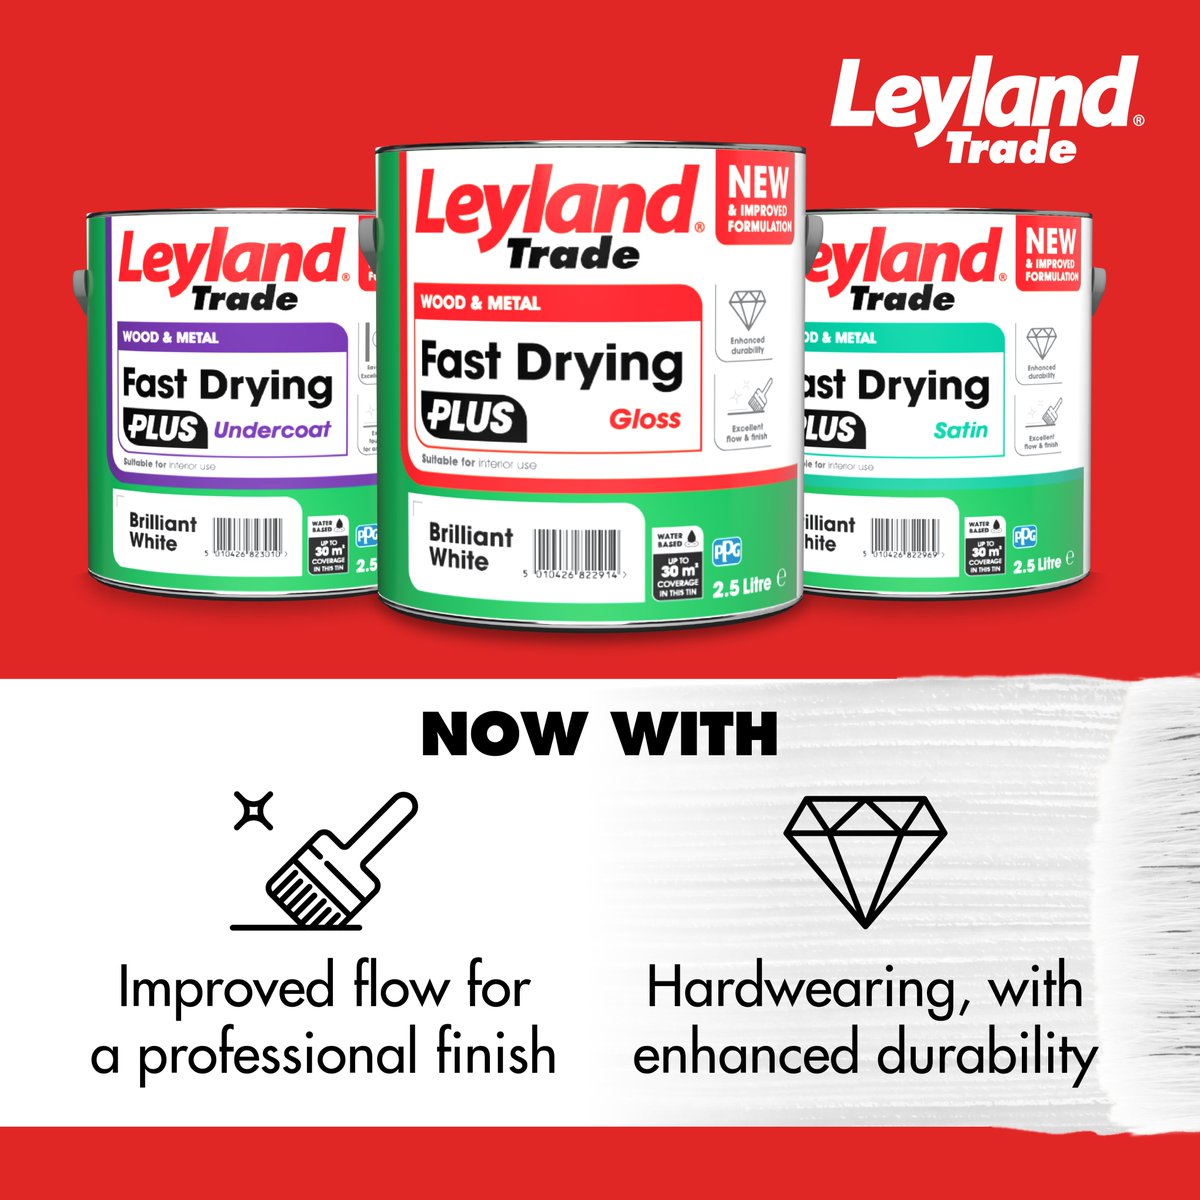 Introducing our new Fast Drying PLUS range, designed to give your projects a long-lasting, professional finish! ​ Find out more: leylandtrade.com/products/inter…